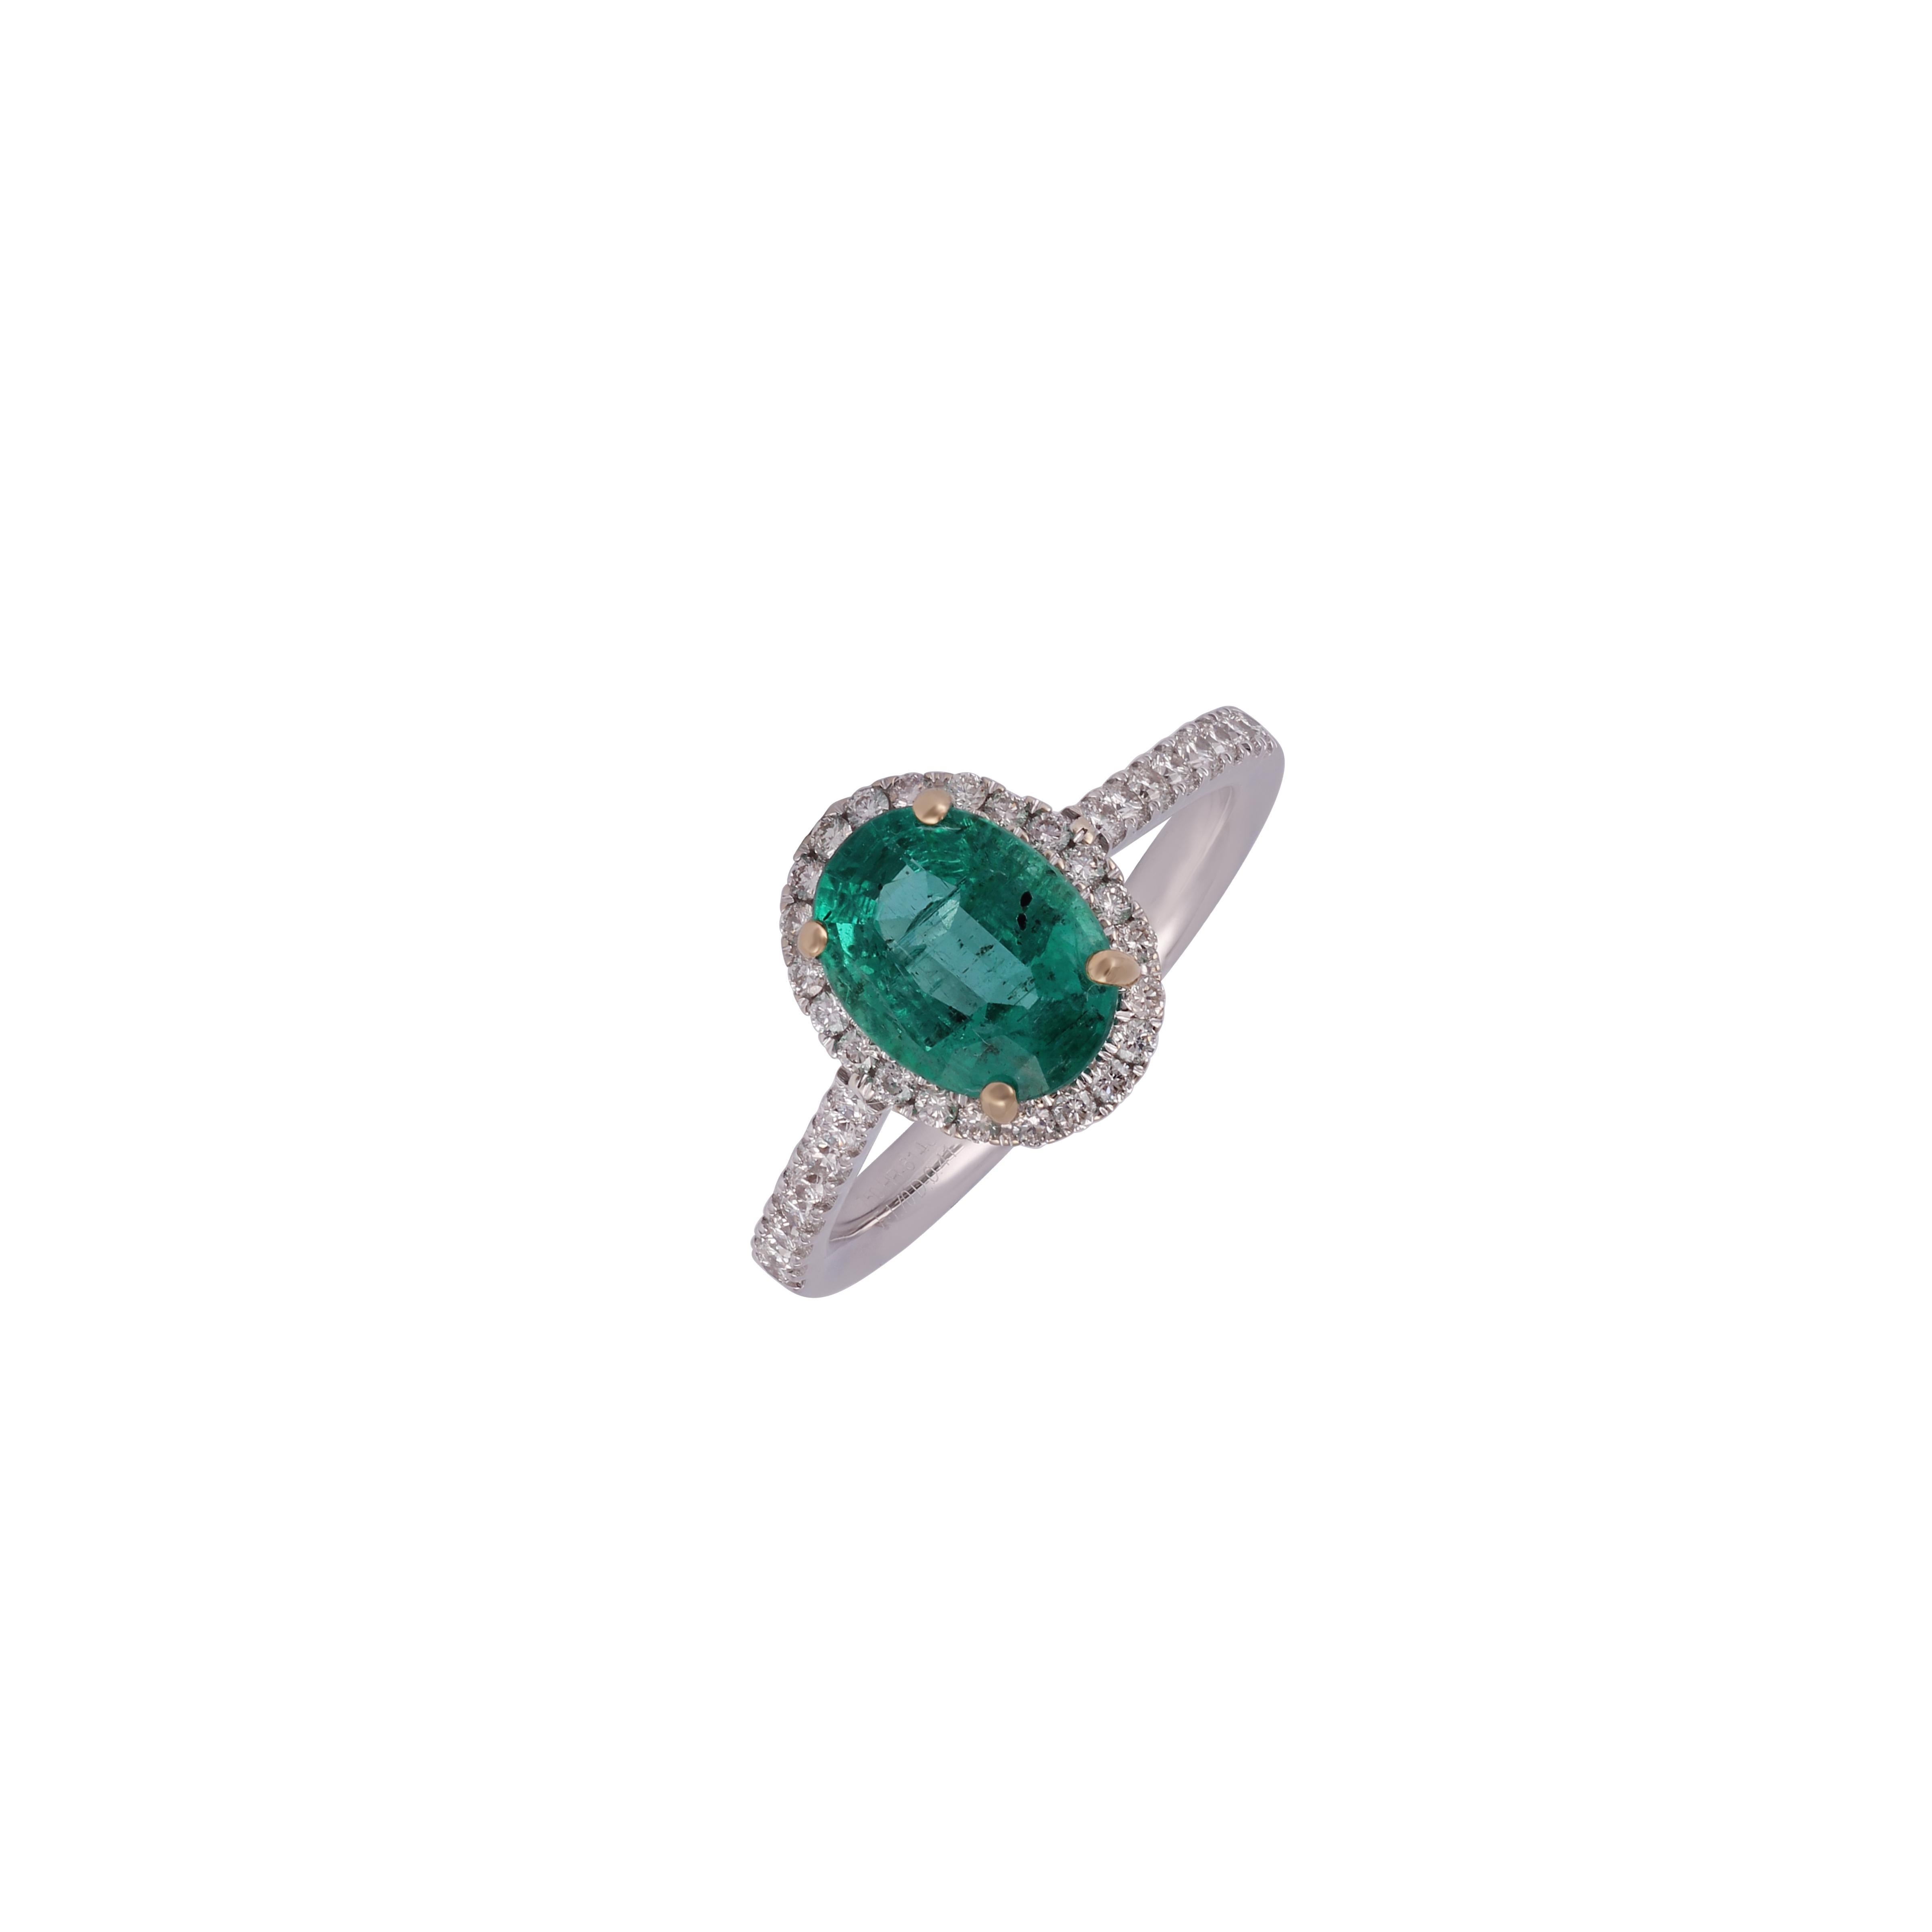 Oval Cut 1.70 Carat Emerald & Diamond Ring Studded in 18K White Gold